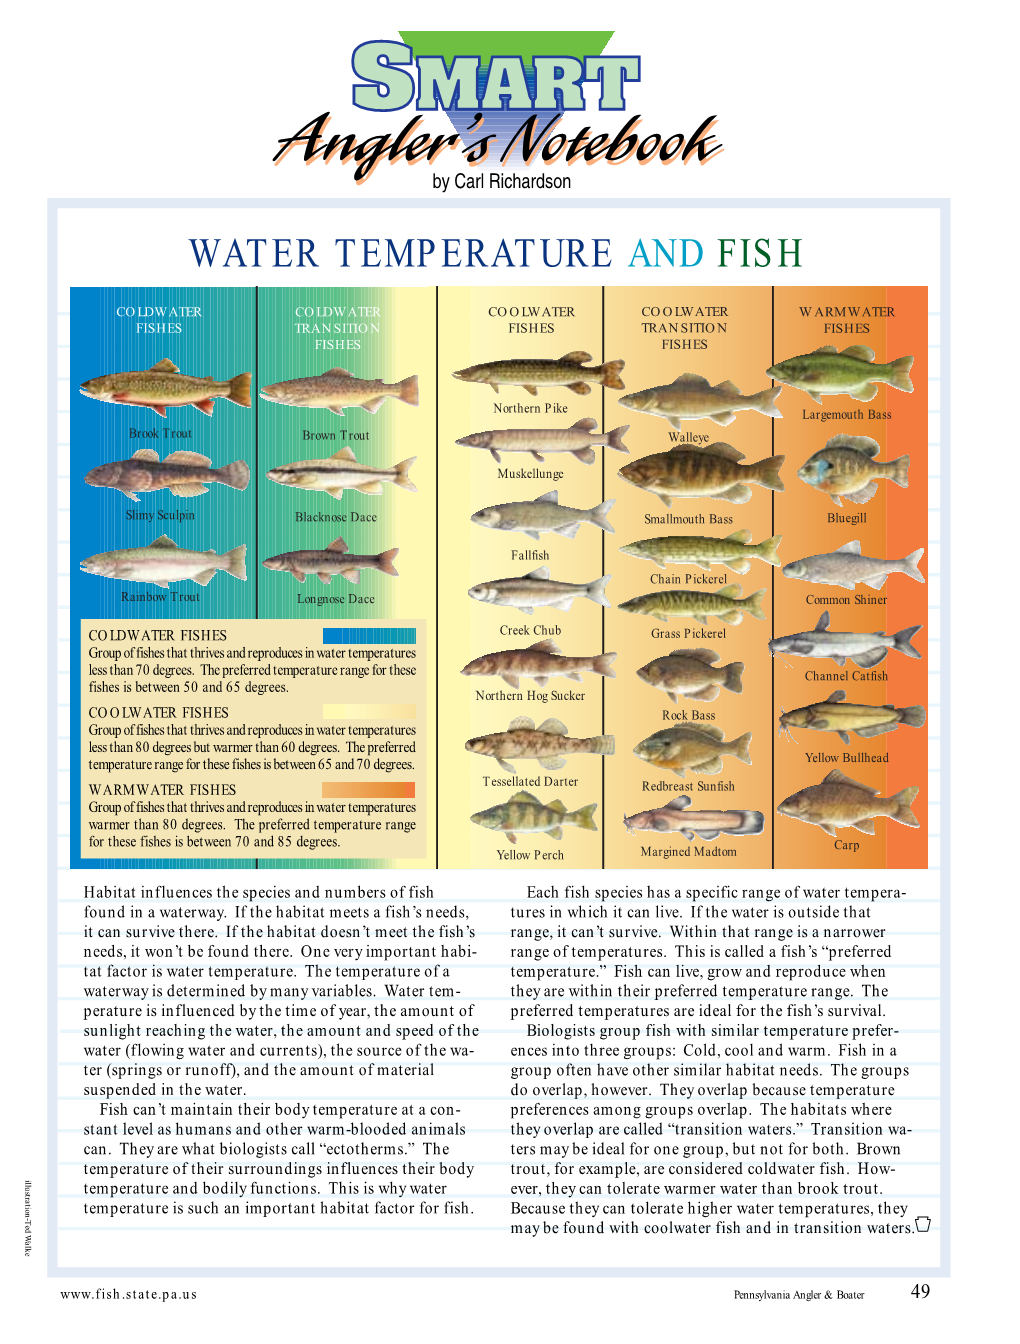 Water Temperature and Fish (SMART Angler's Notebook)